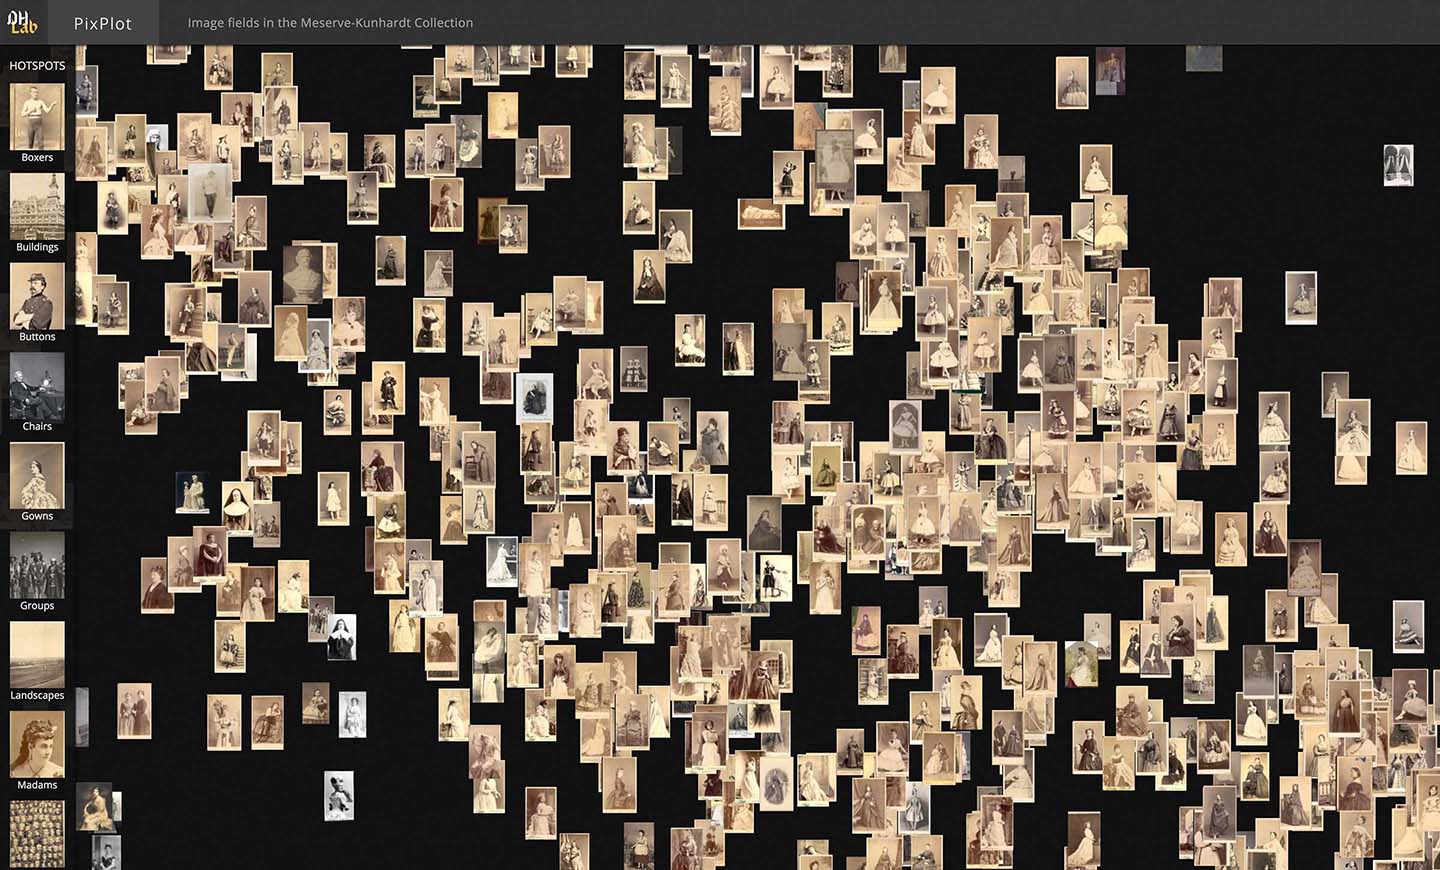 View from PixPlot of scattered photographs from the Meserve Kunhardt Collection